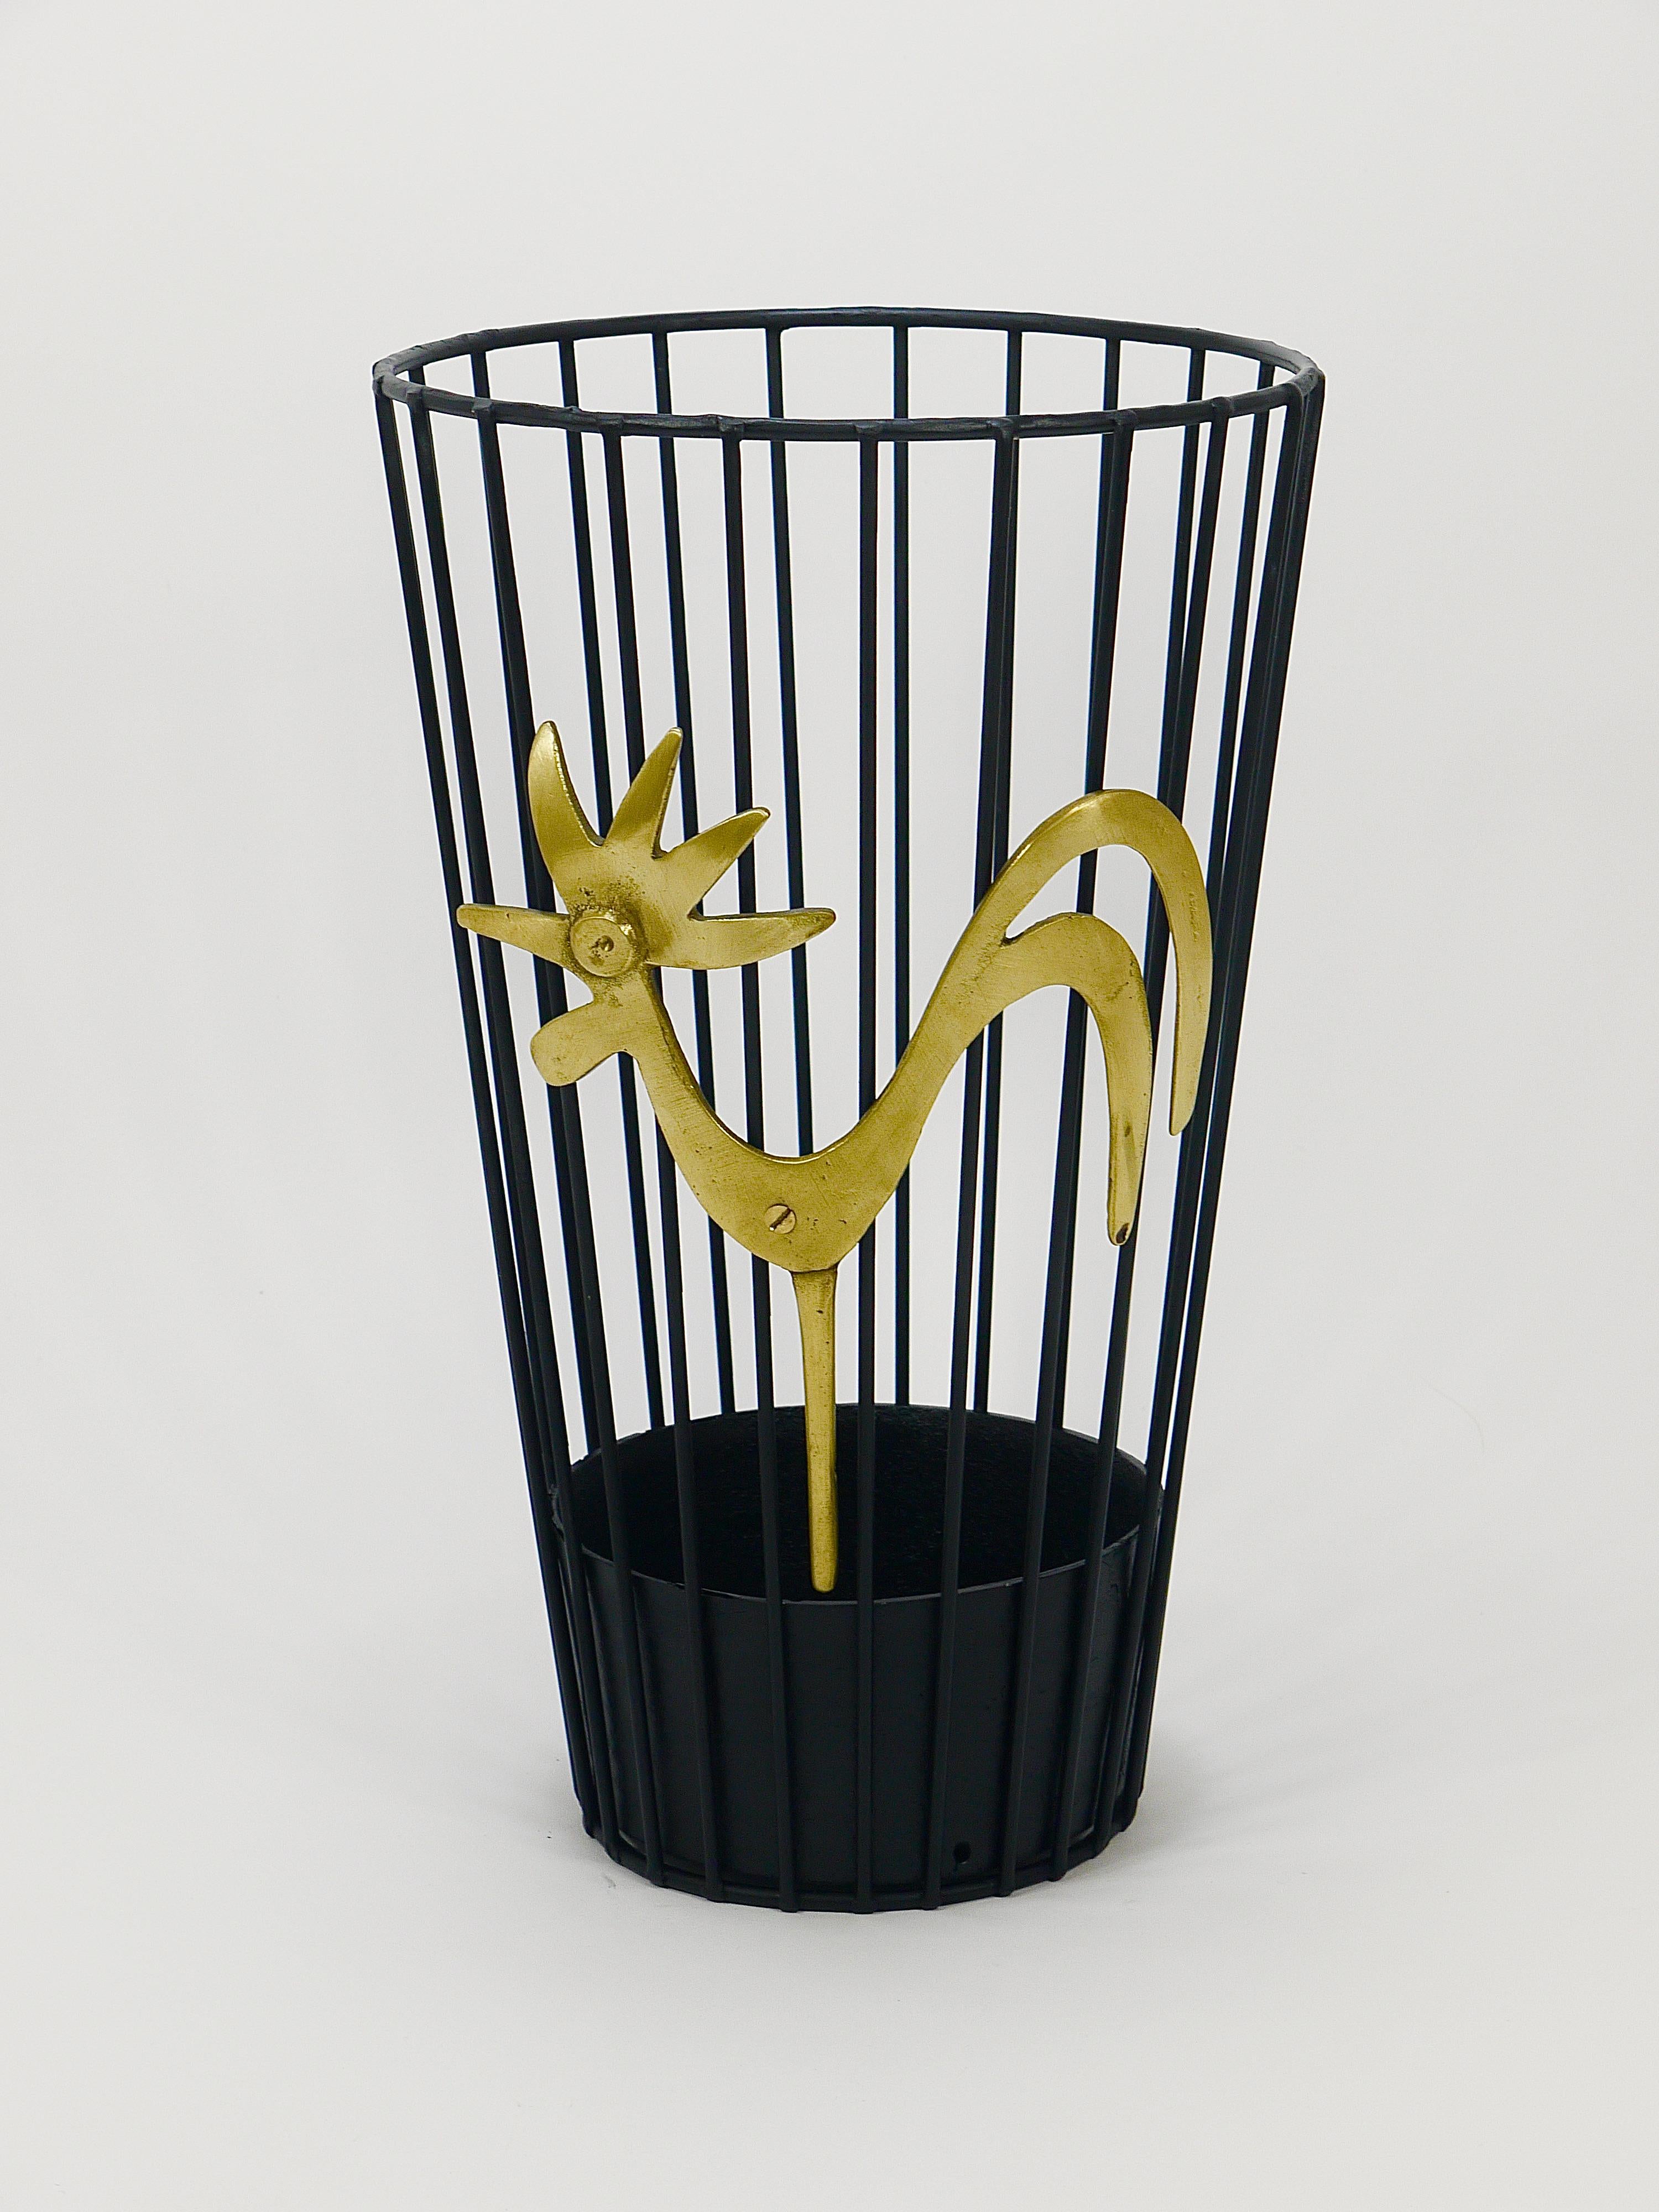 Walter Bosse Brass Rooster Mid-Century Umbrella Stand for Herta Baller, 1950s In Good Condition For Sale In Vienna, AT